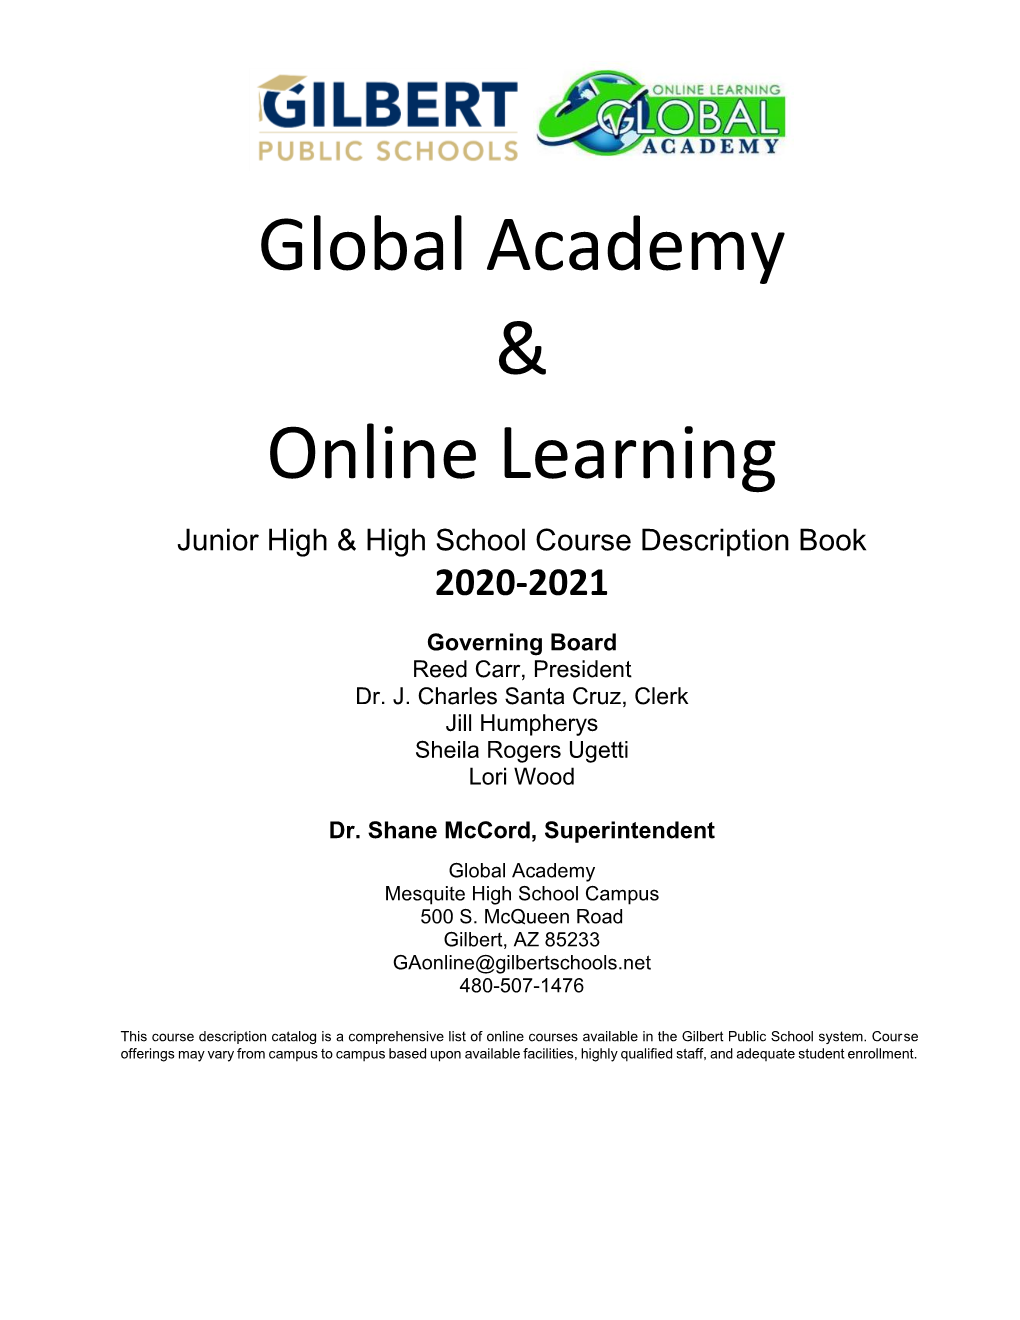 Global Academy & Online Learning